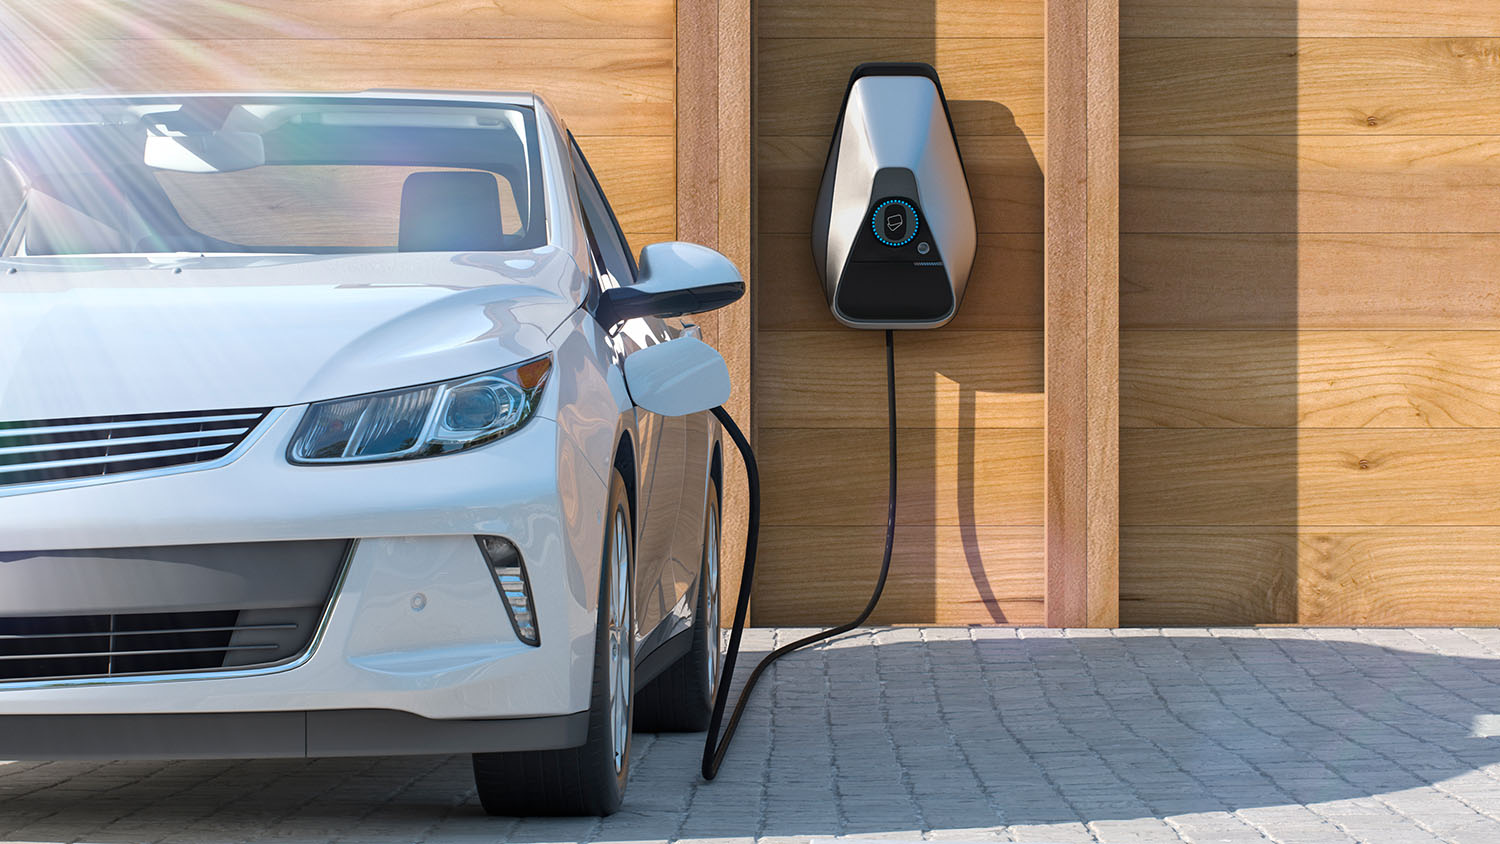 A white electric vehicle parked in front of a wall-mounted charger and plugged in